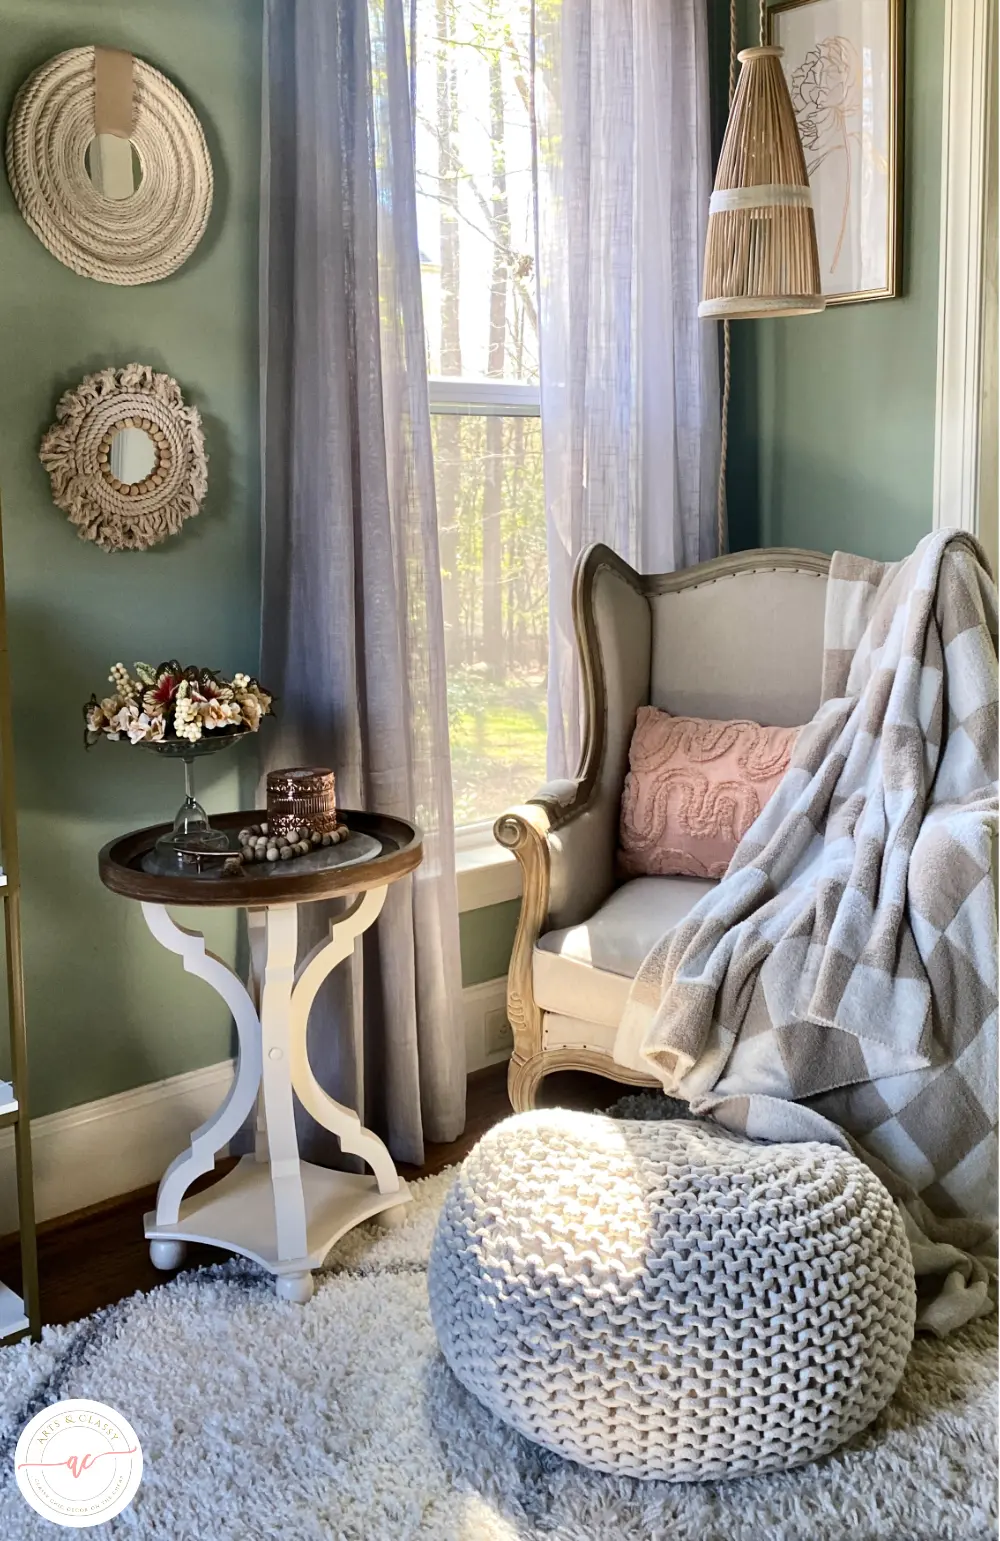 Embrace Comfort: 9 Frugal Hacks for Crafting a Cozy Reading Nook